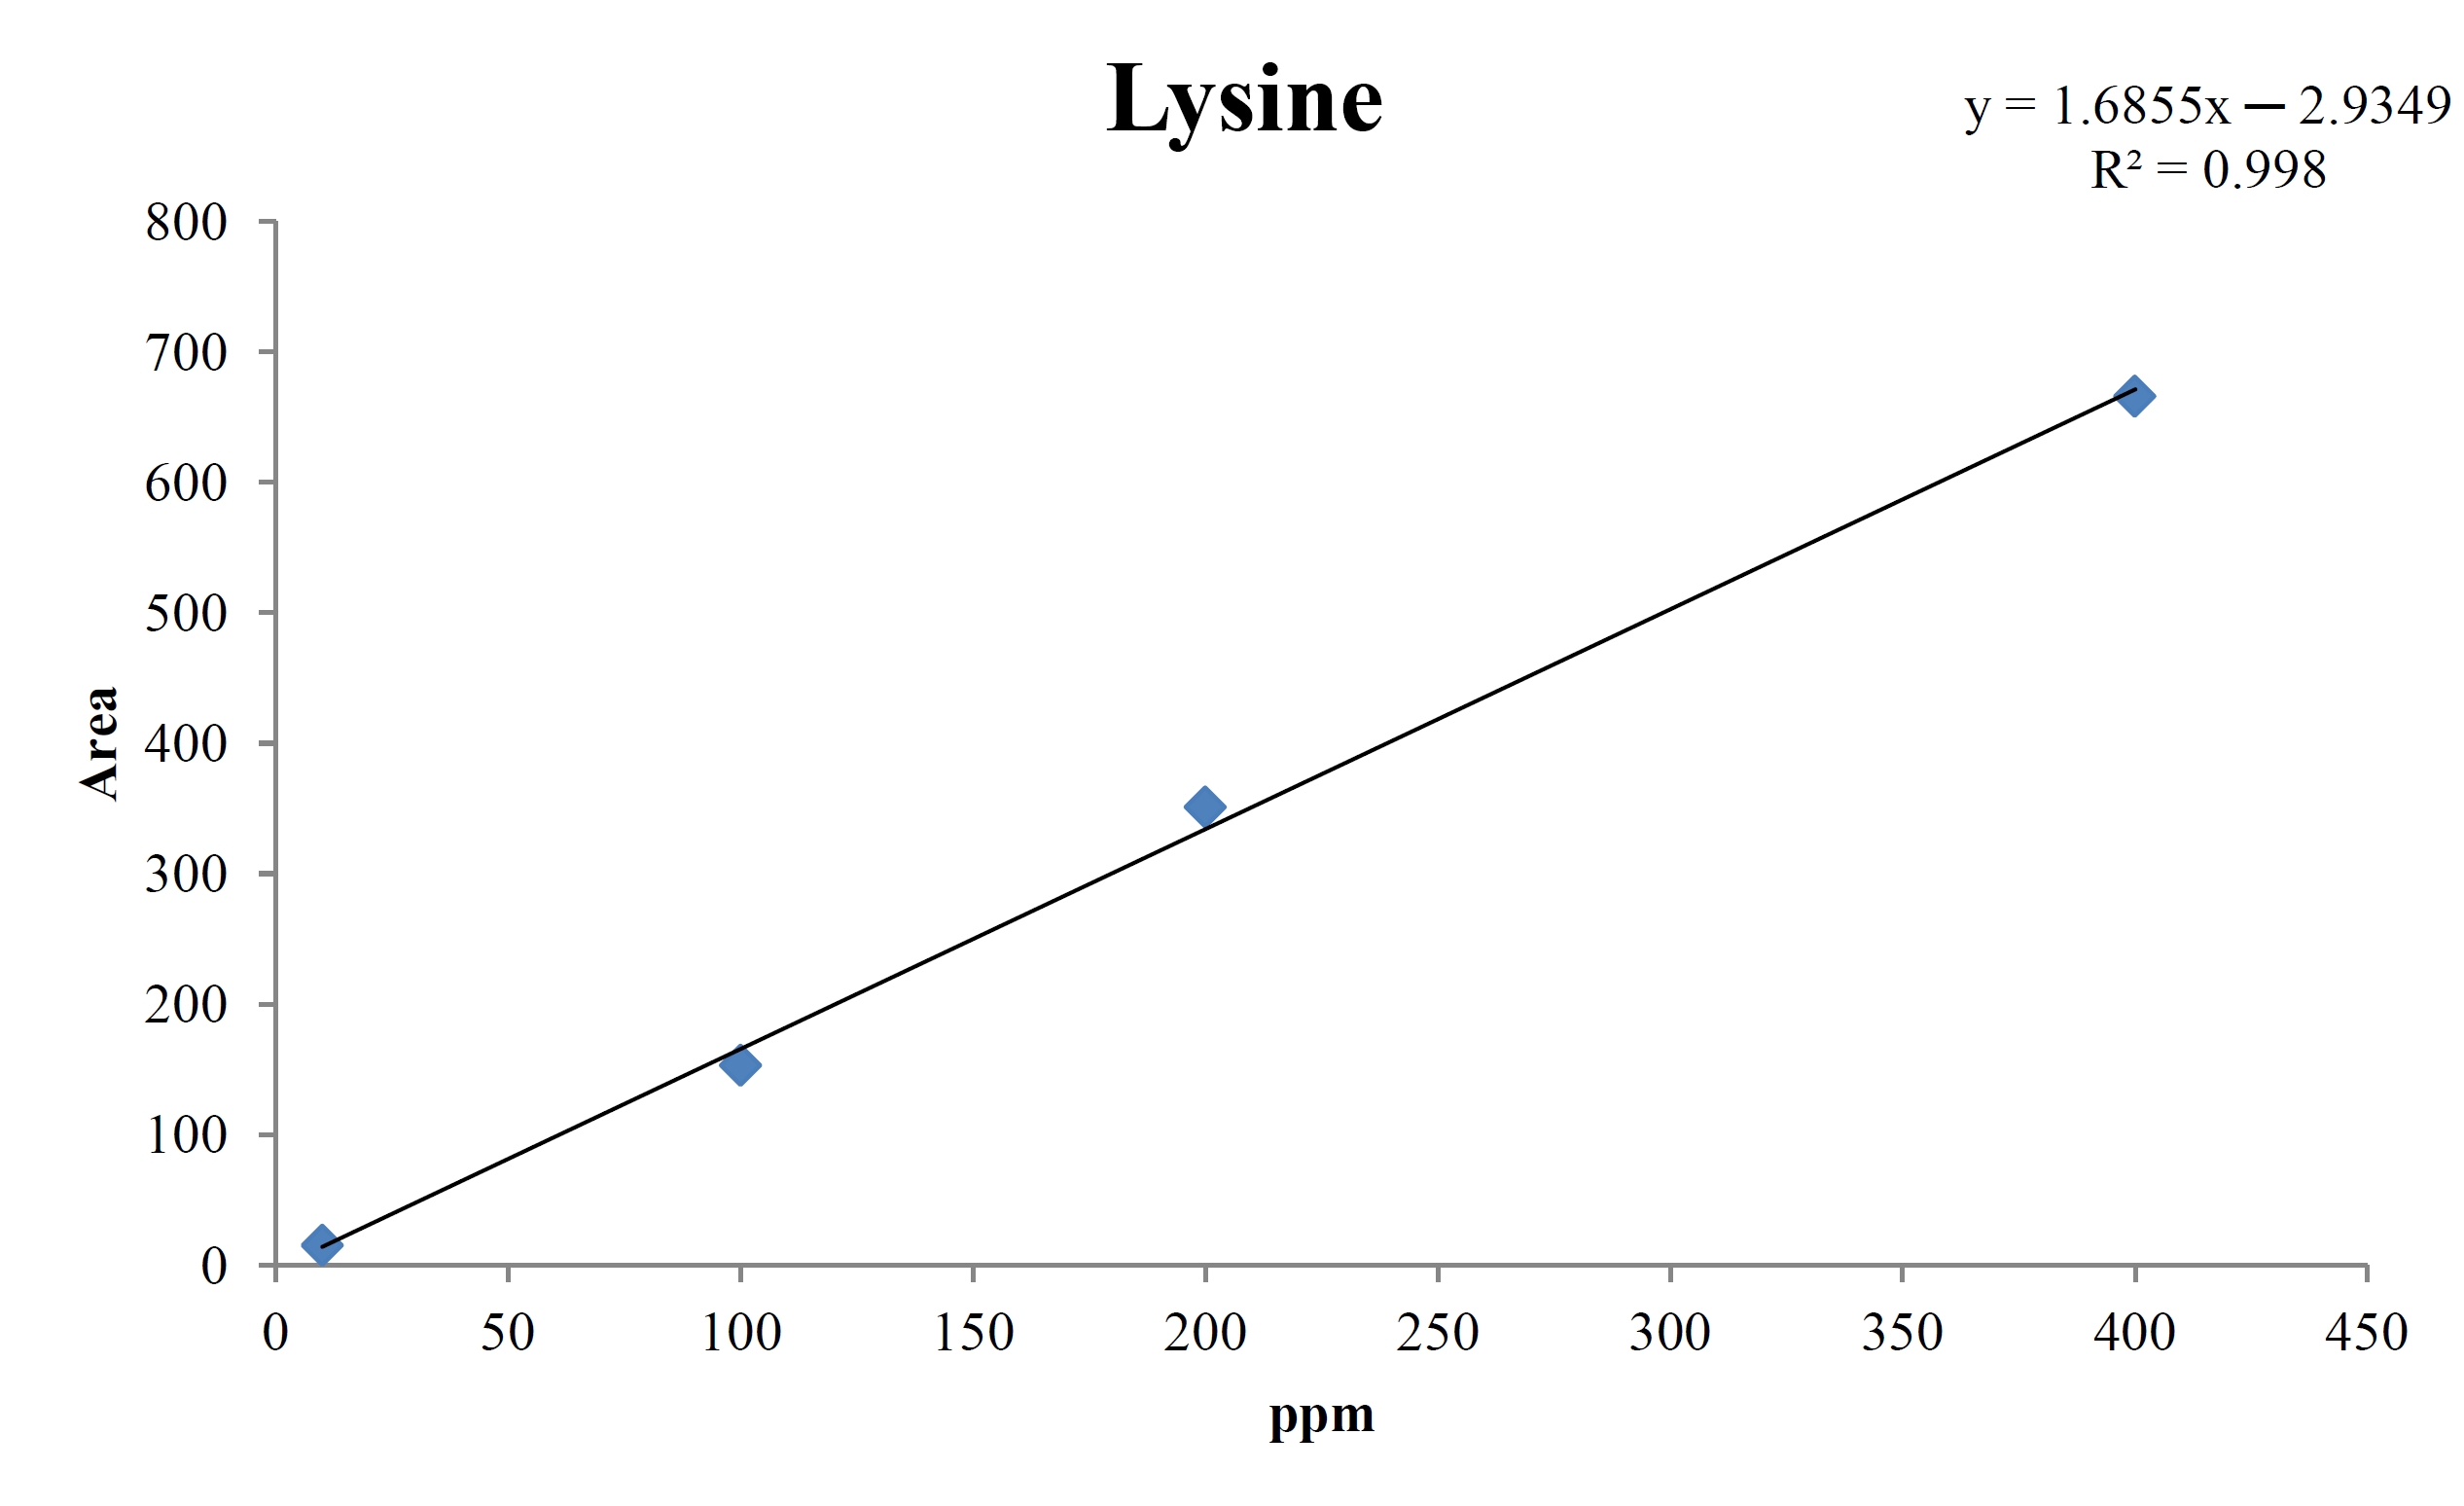 Analytical calibration curve of lysine STD for concentrations of 400, 200, 100, and 10 ppm.